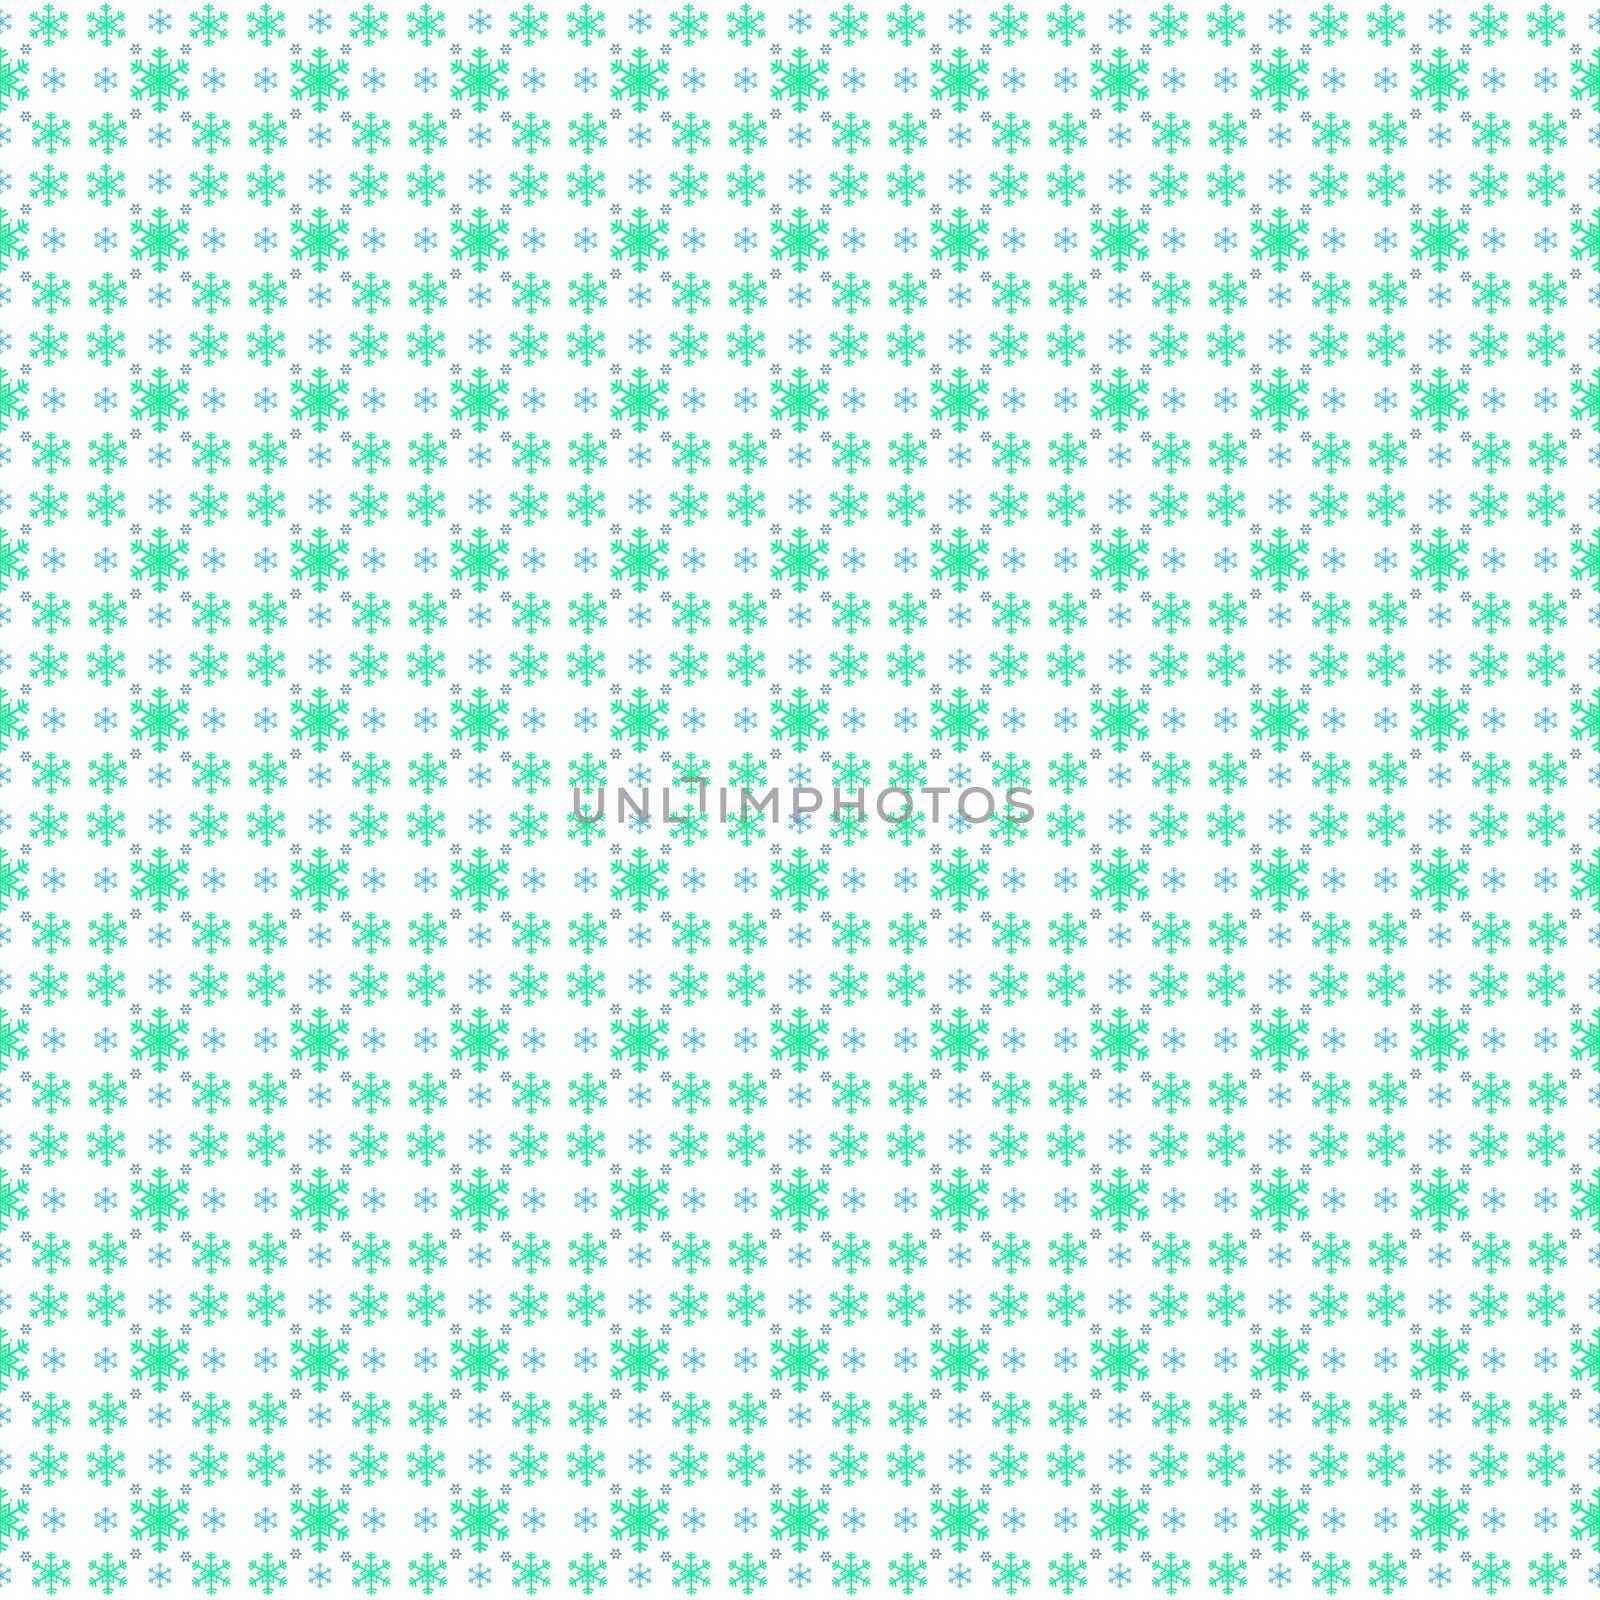 Seamless pattern of snowflake on white background. Plants seamle by Unimages2527